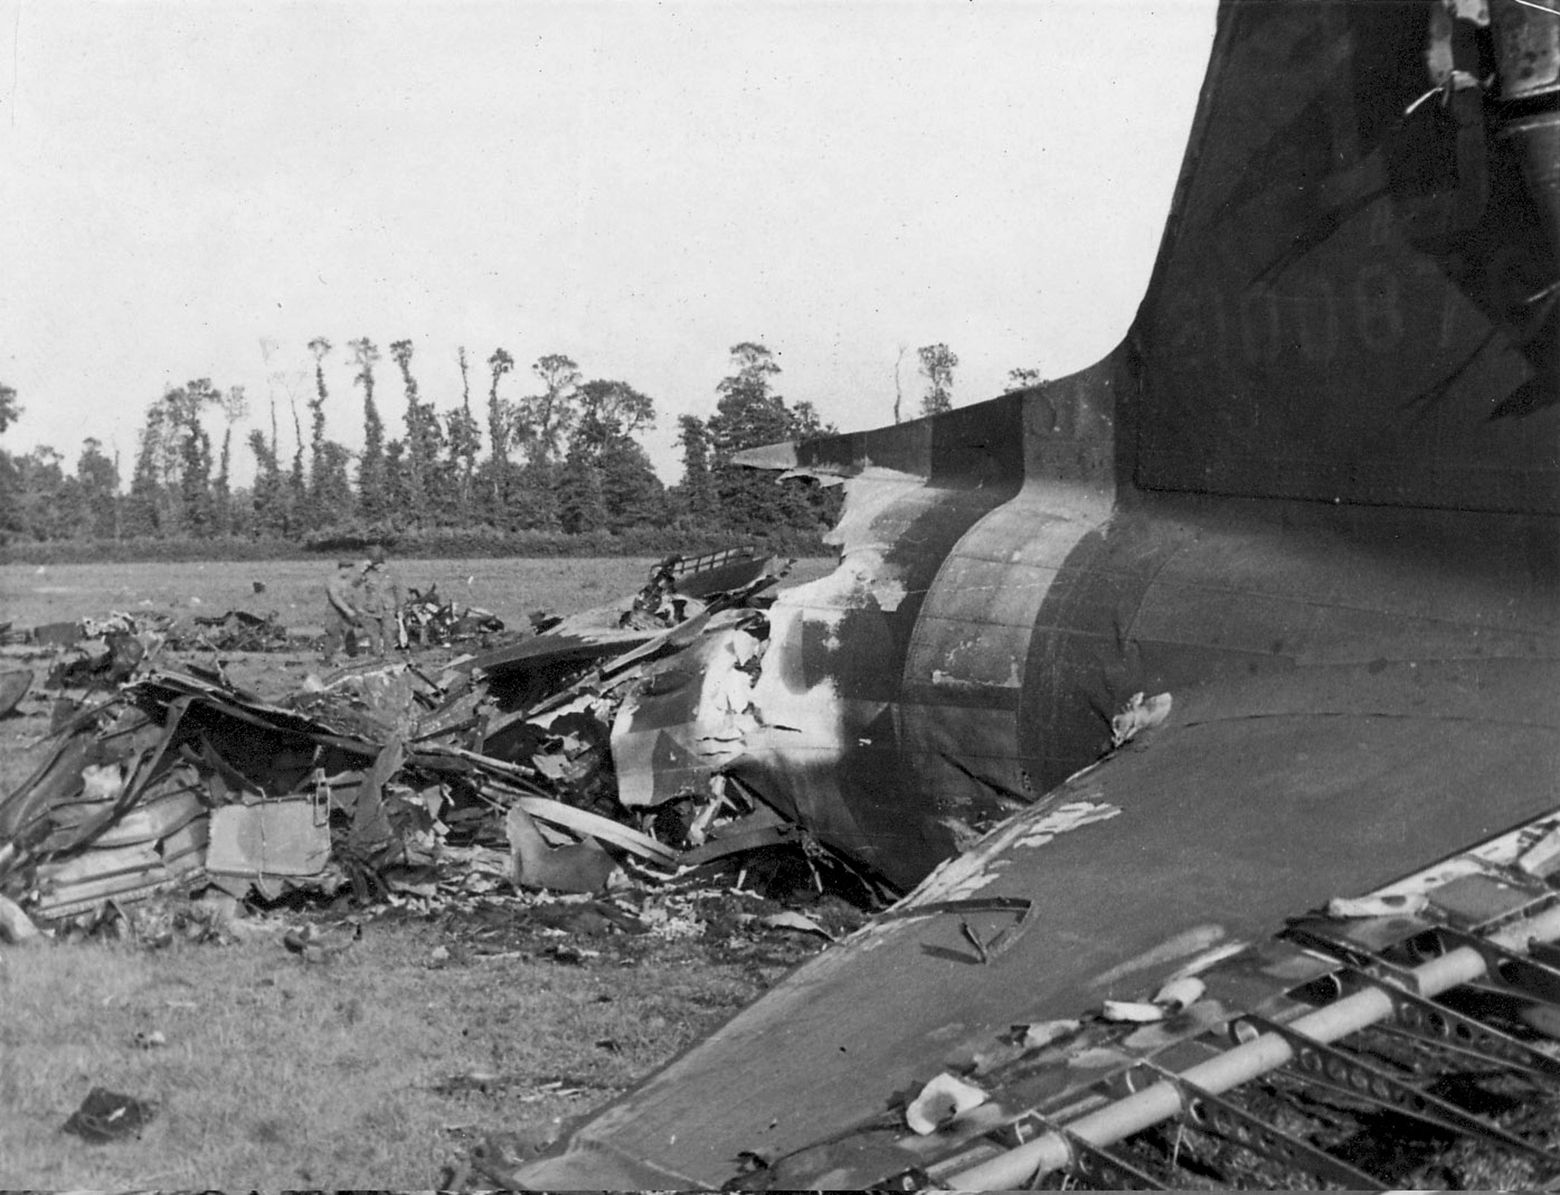 All that remained of a C-47 that crashed and burned in Normandy.